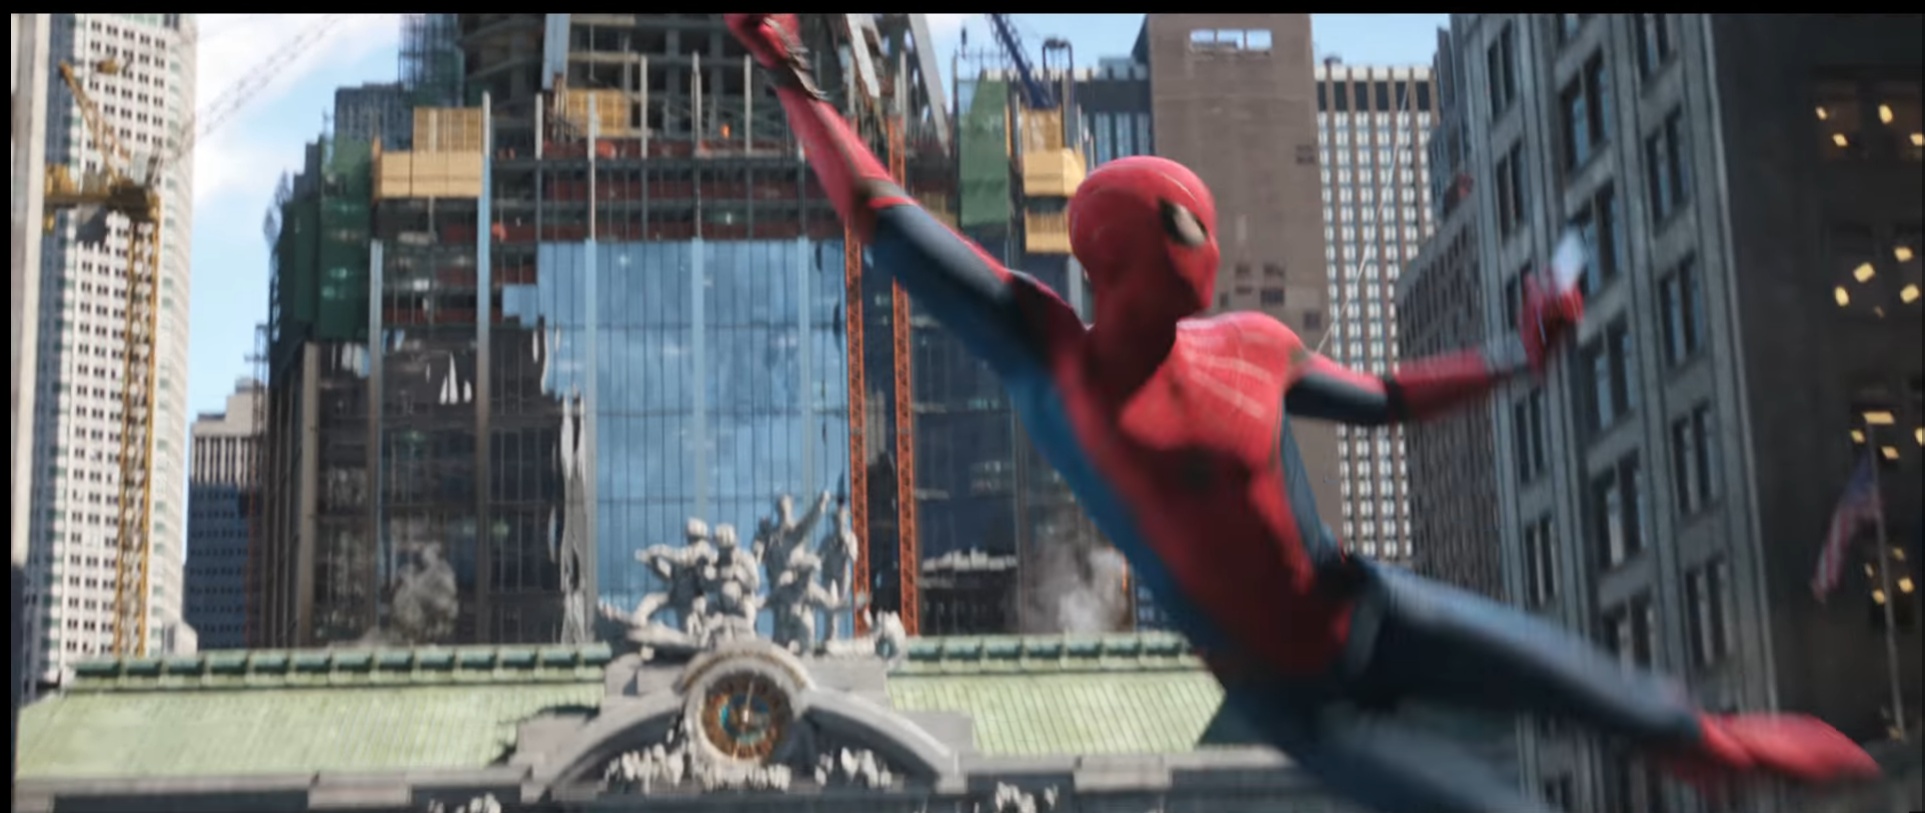 Spider-man: Far from home trailer